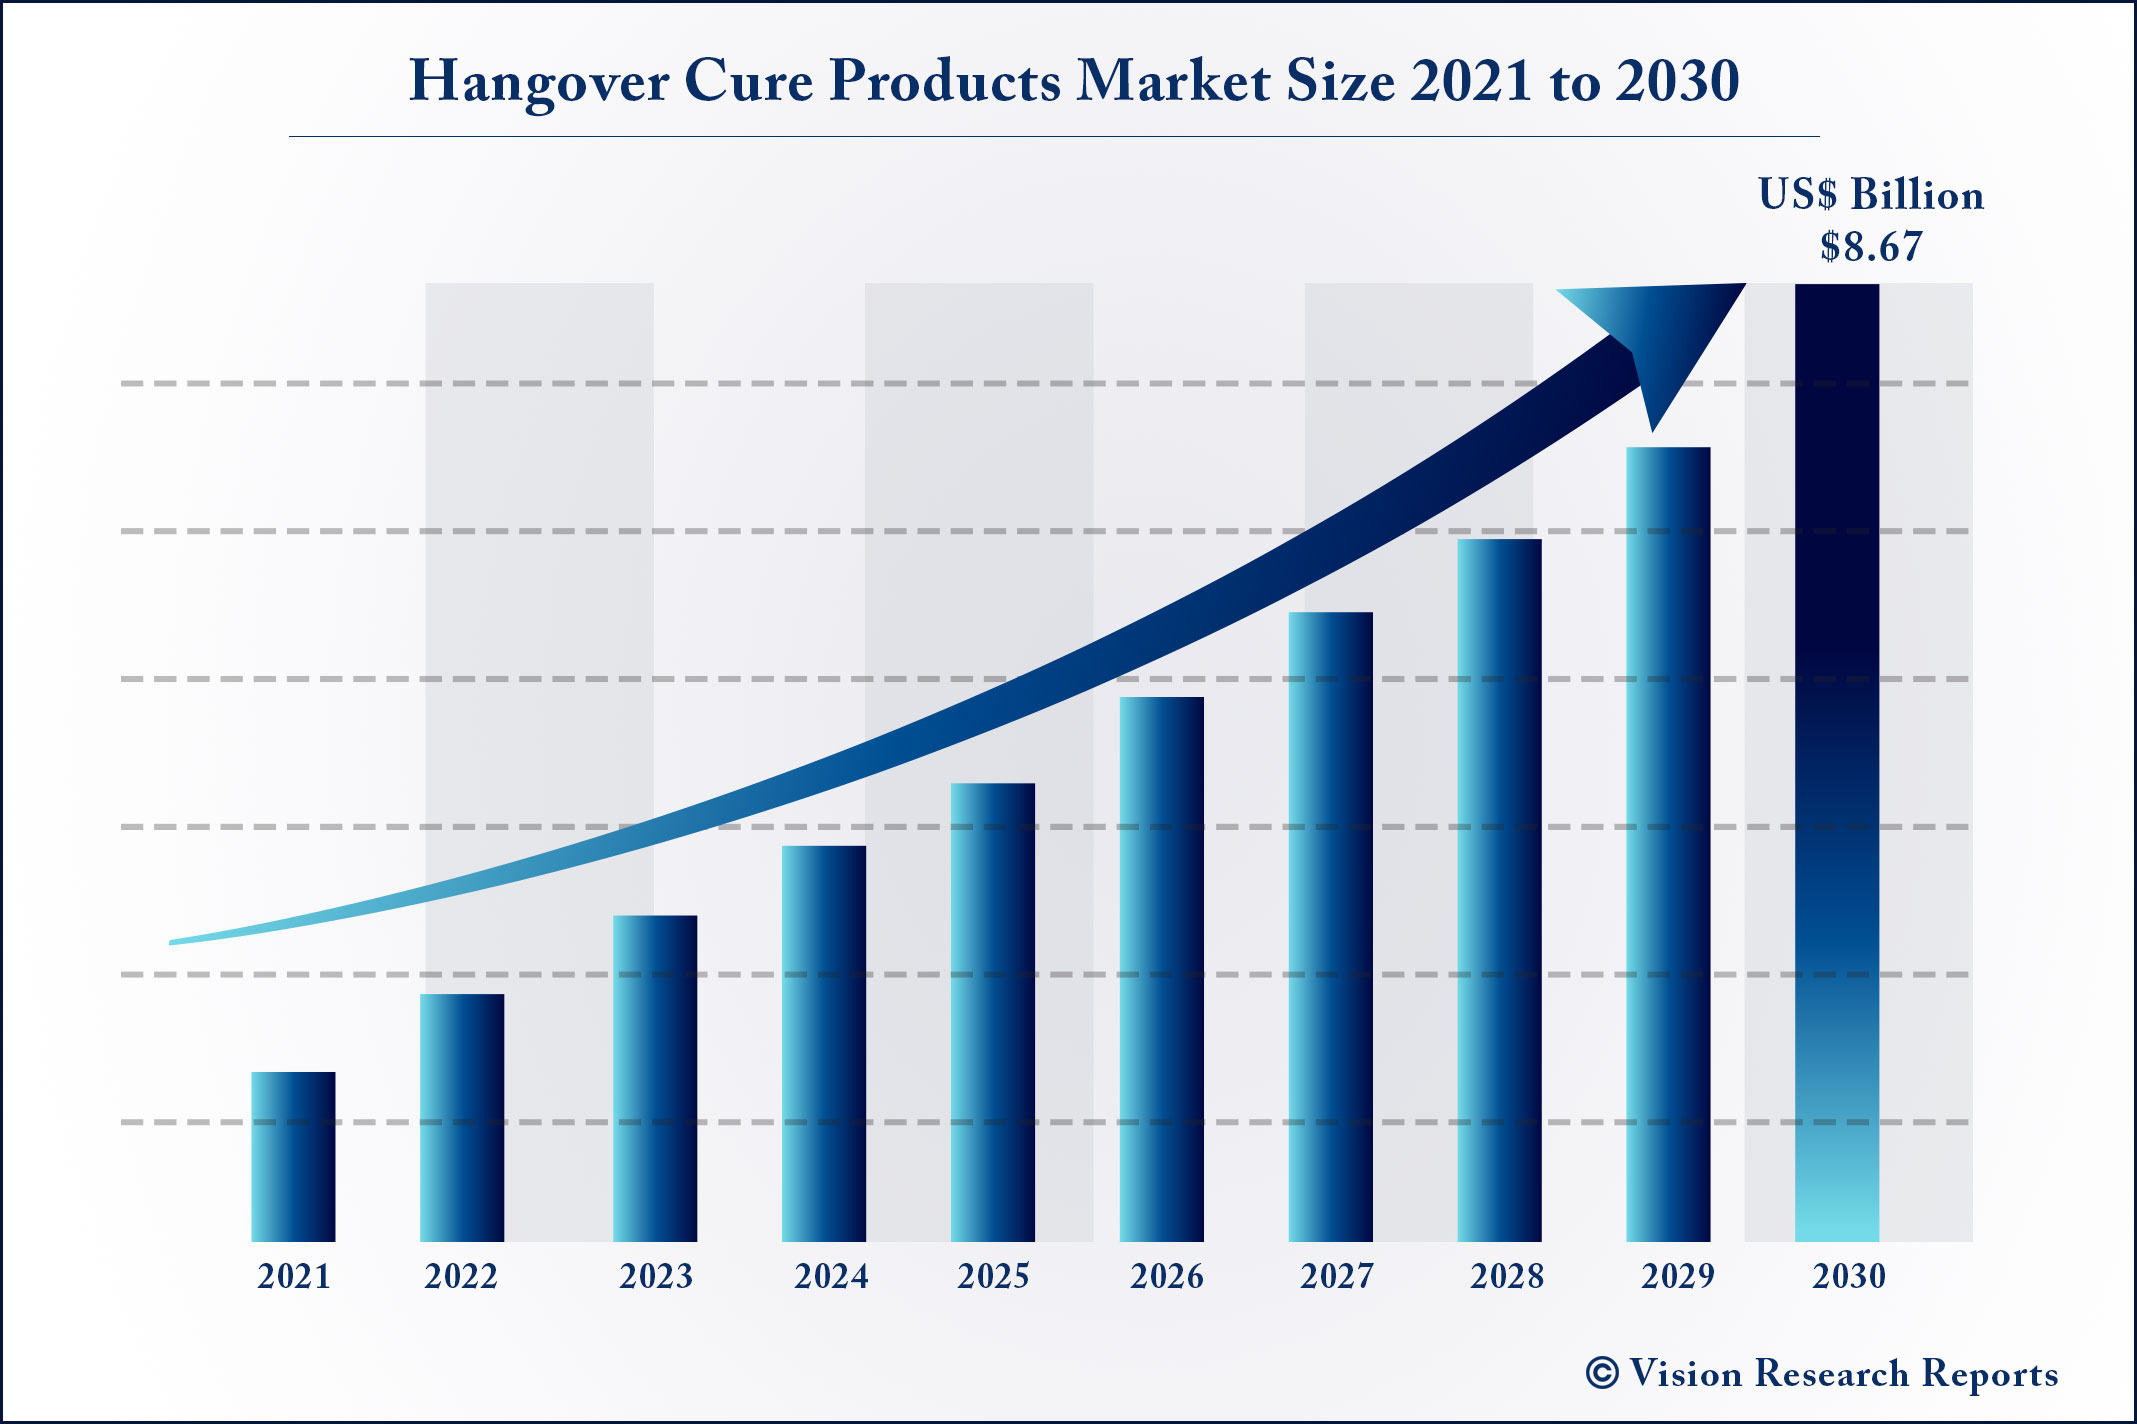 Hangover Cure Products Market Size 2021 to 2030